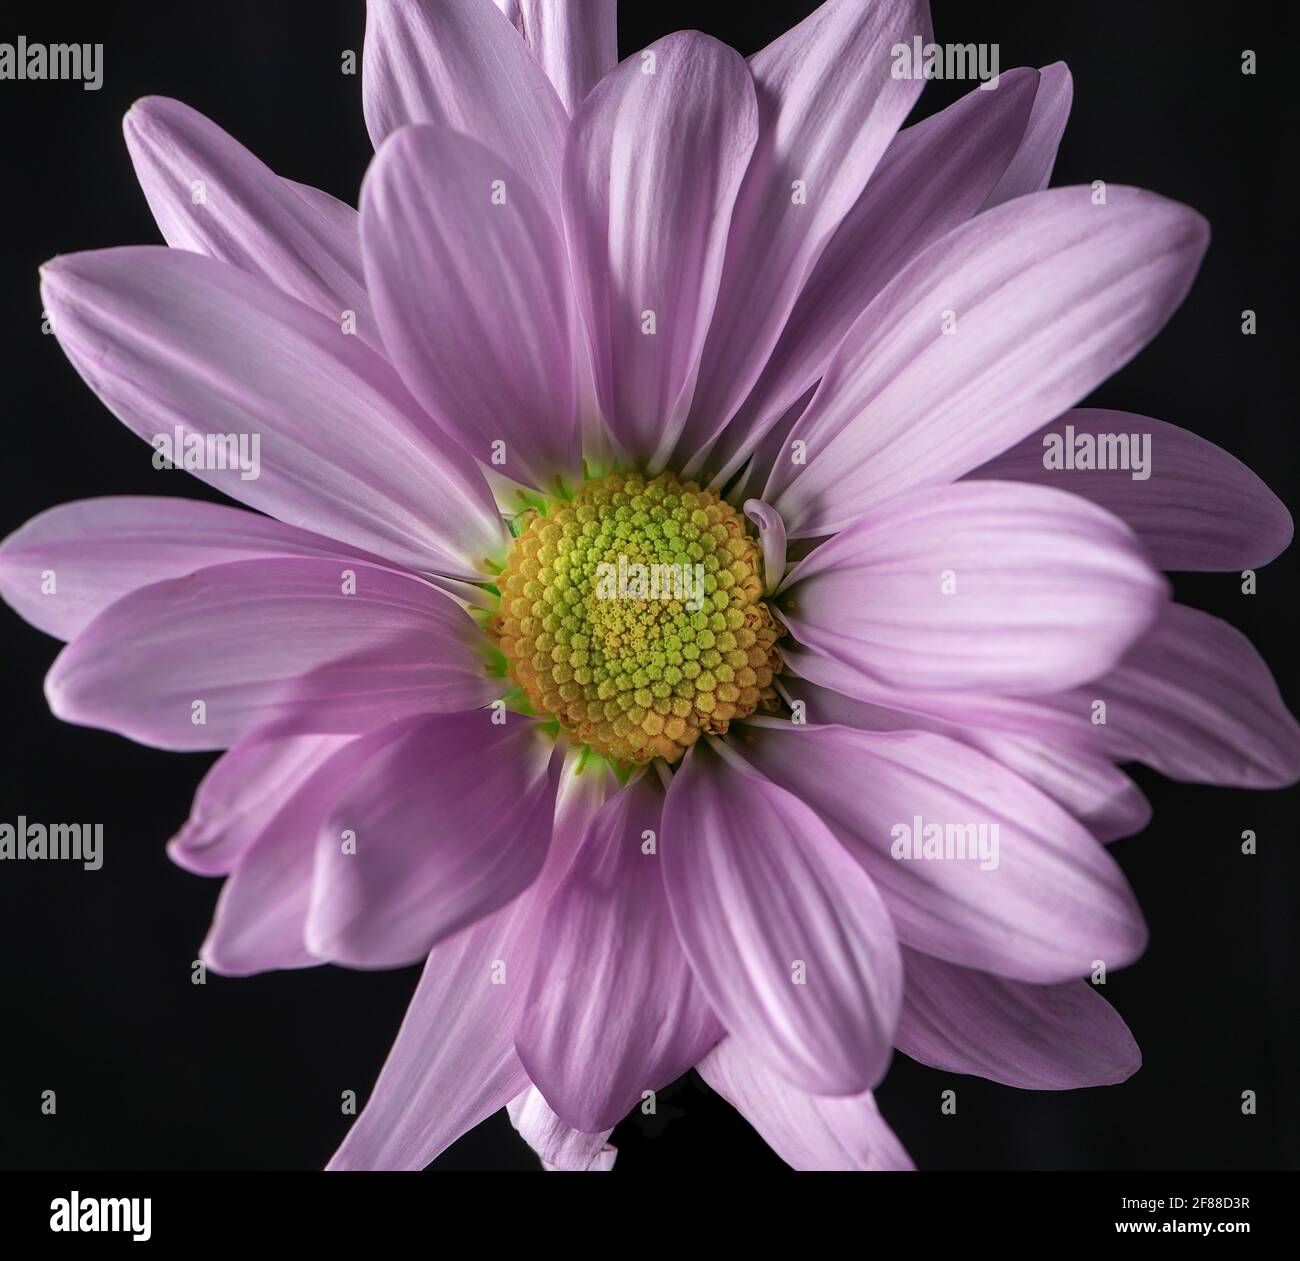 Close up of vibrant pink daisy with a black background Stock Photo